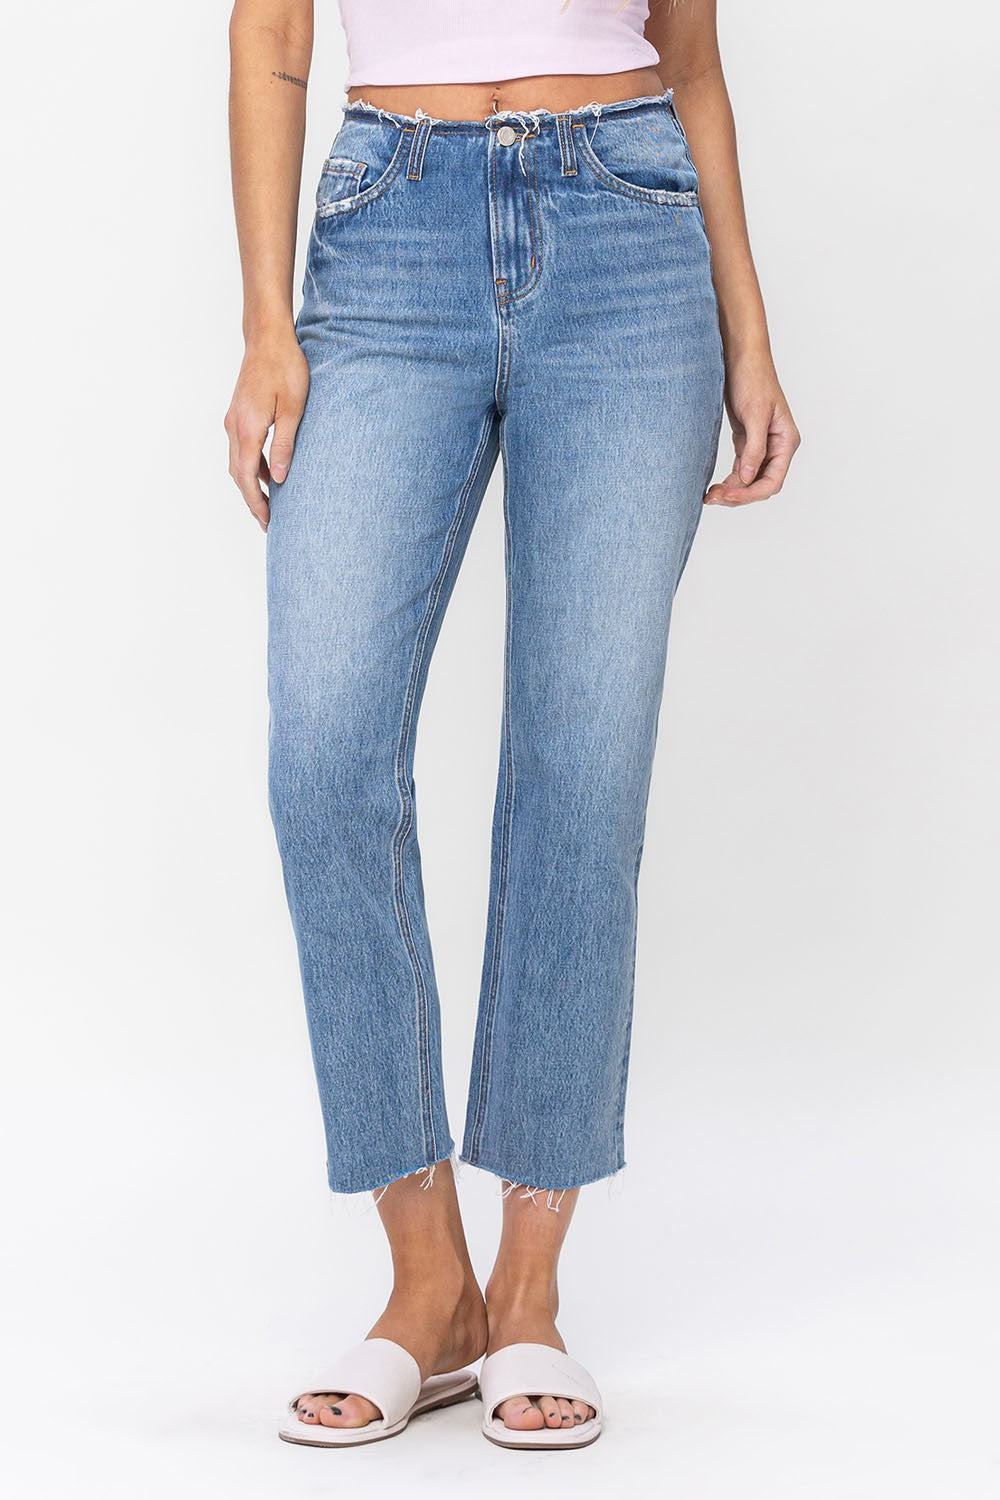 Valorie High Rise Light Wash Cropped Jeans